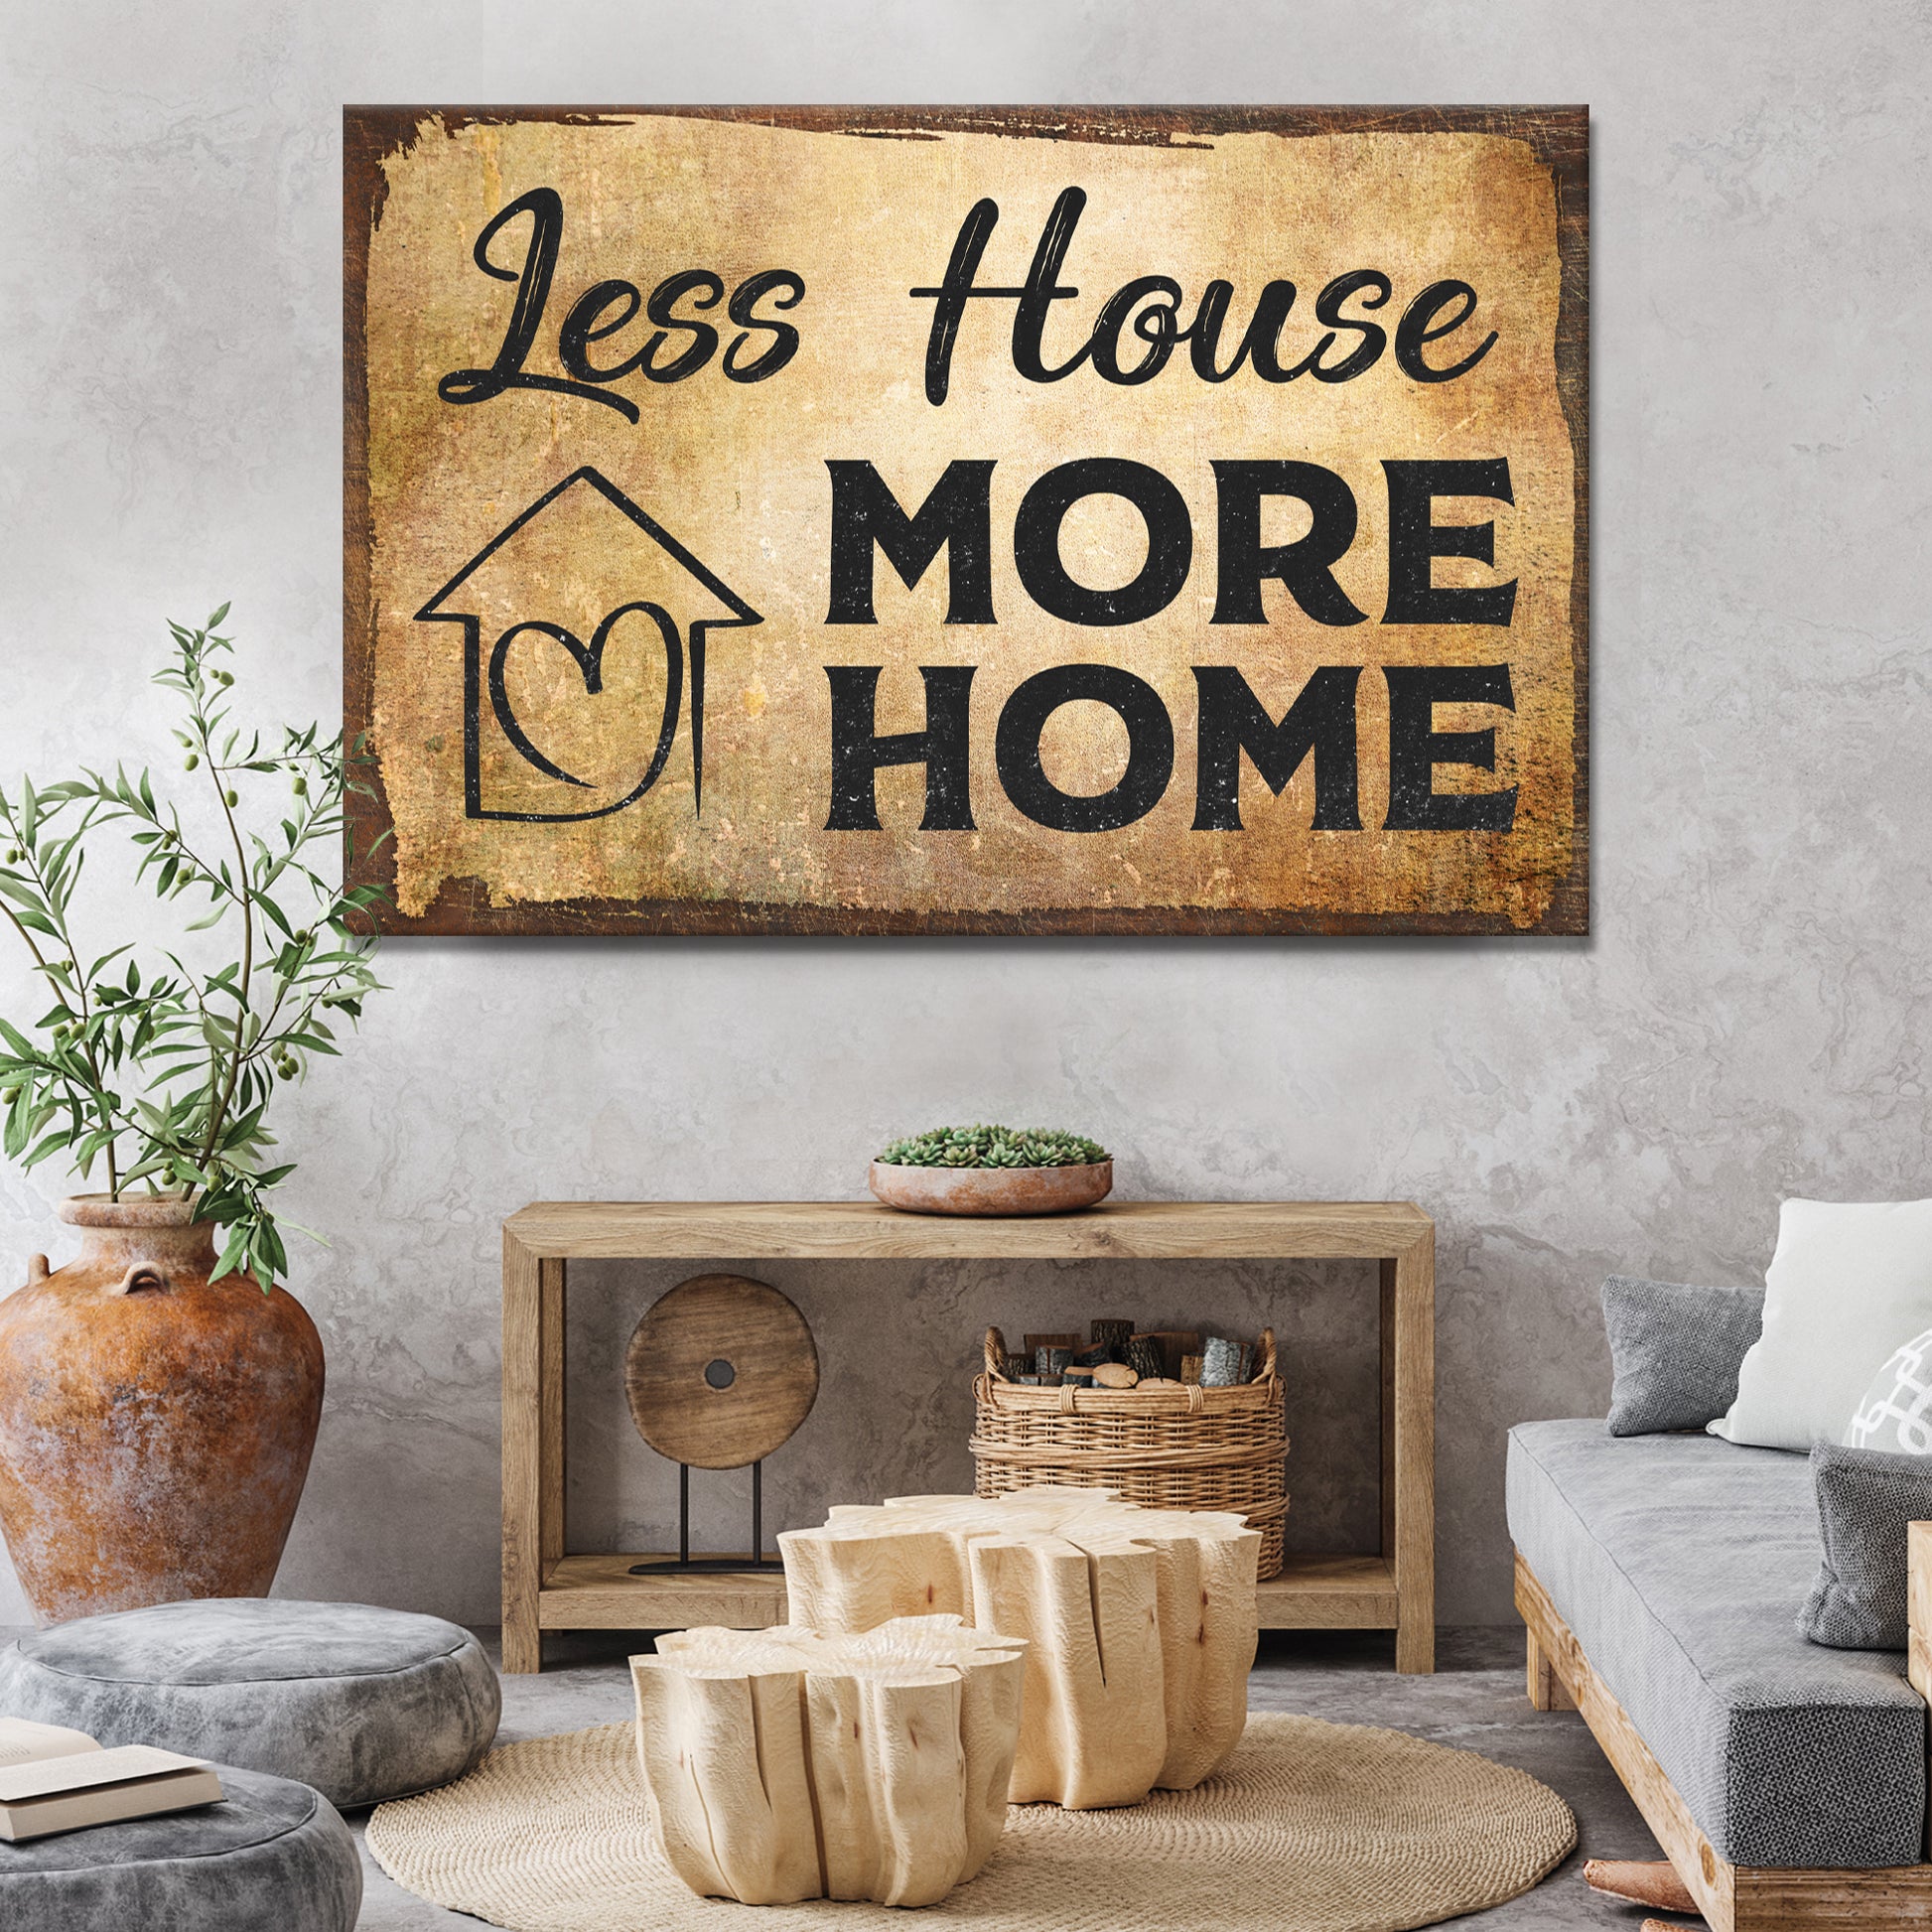 Less House More Home Sign - Image by Tailored Canvases